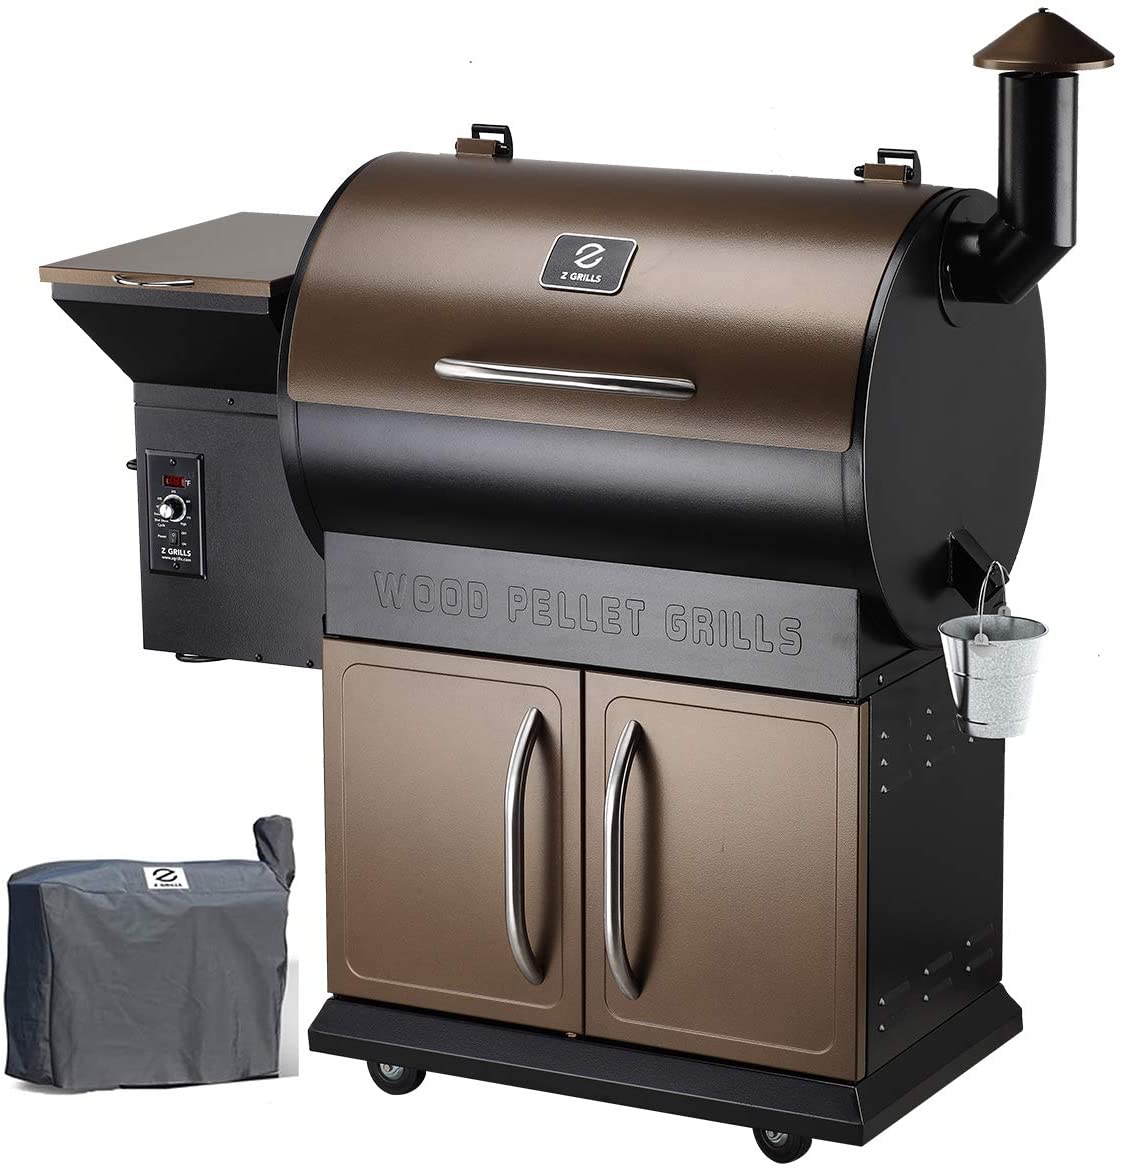 Z Grills Wood Pellet Grill and Smoker